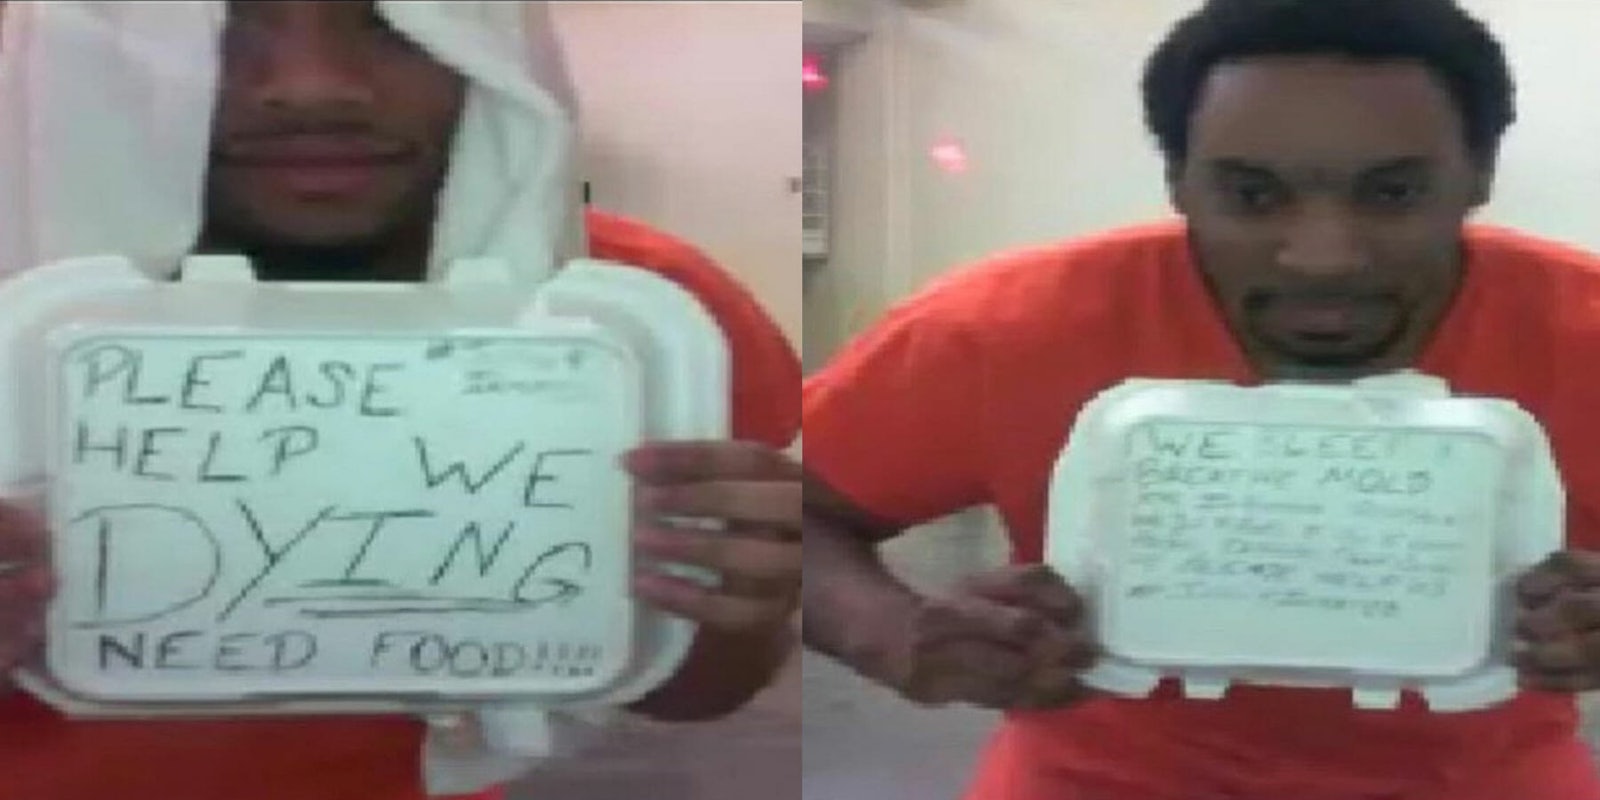 Two Georgia inmates seen in separate images sharing messages such as 'We are dying' on the back of their lunch boxes